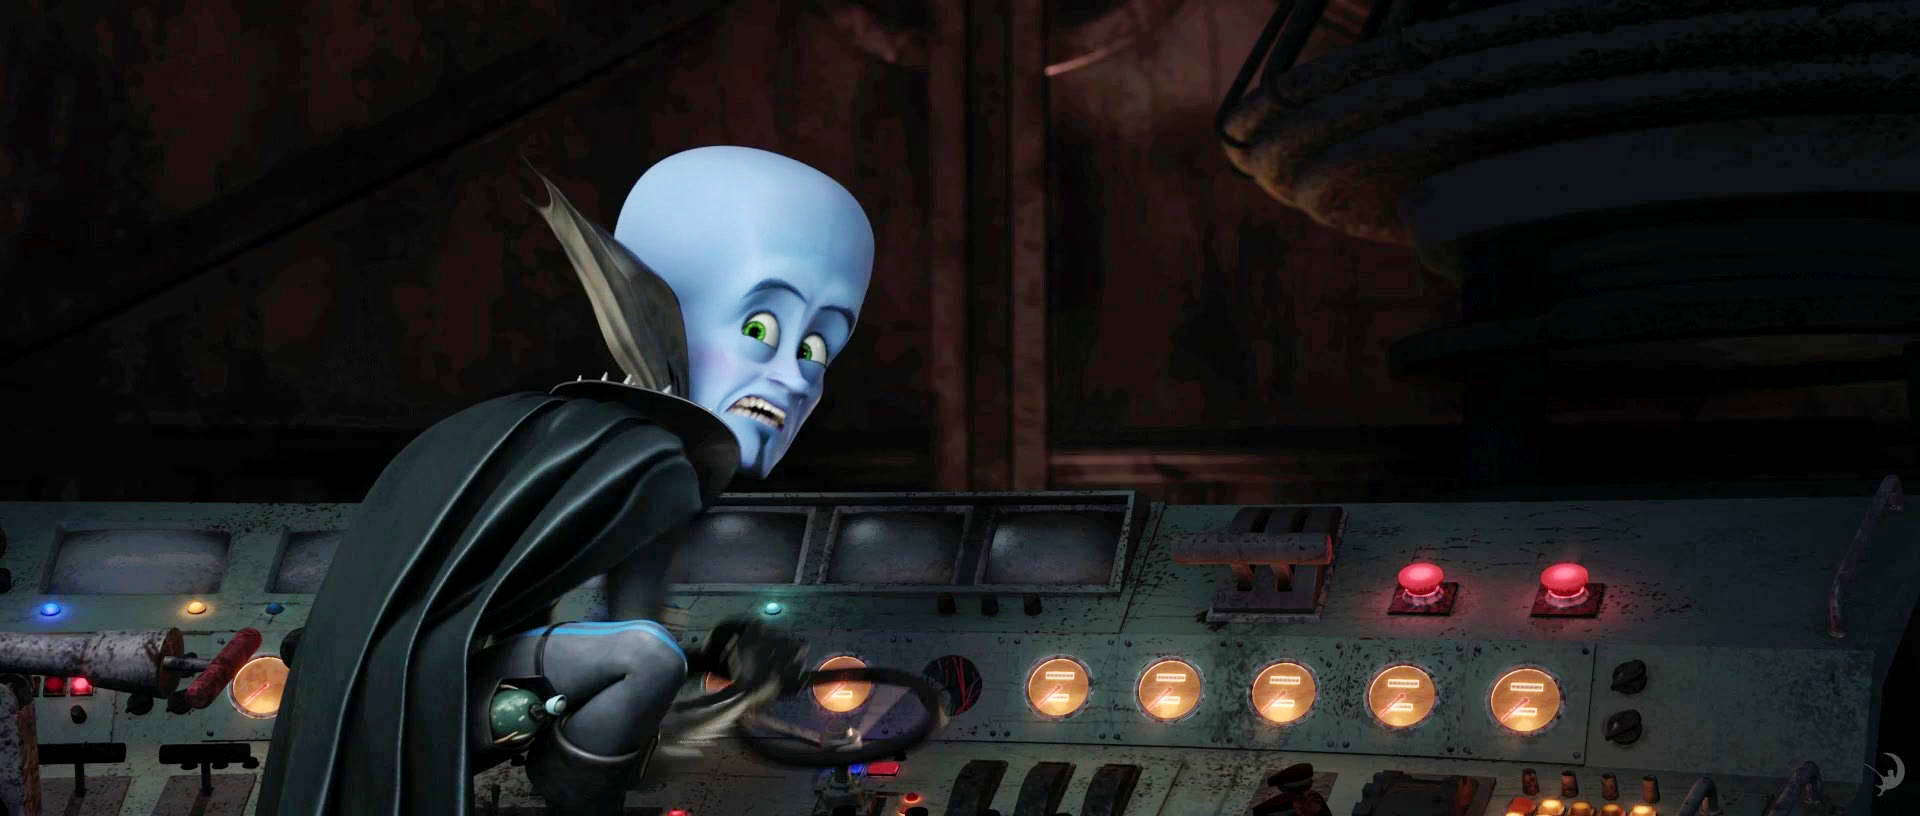 the plan is not working - MegaMind Image (16948630) - Fanpop - Page 11